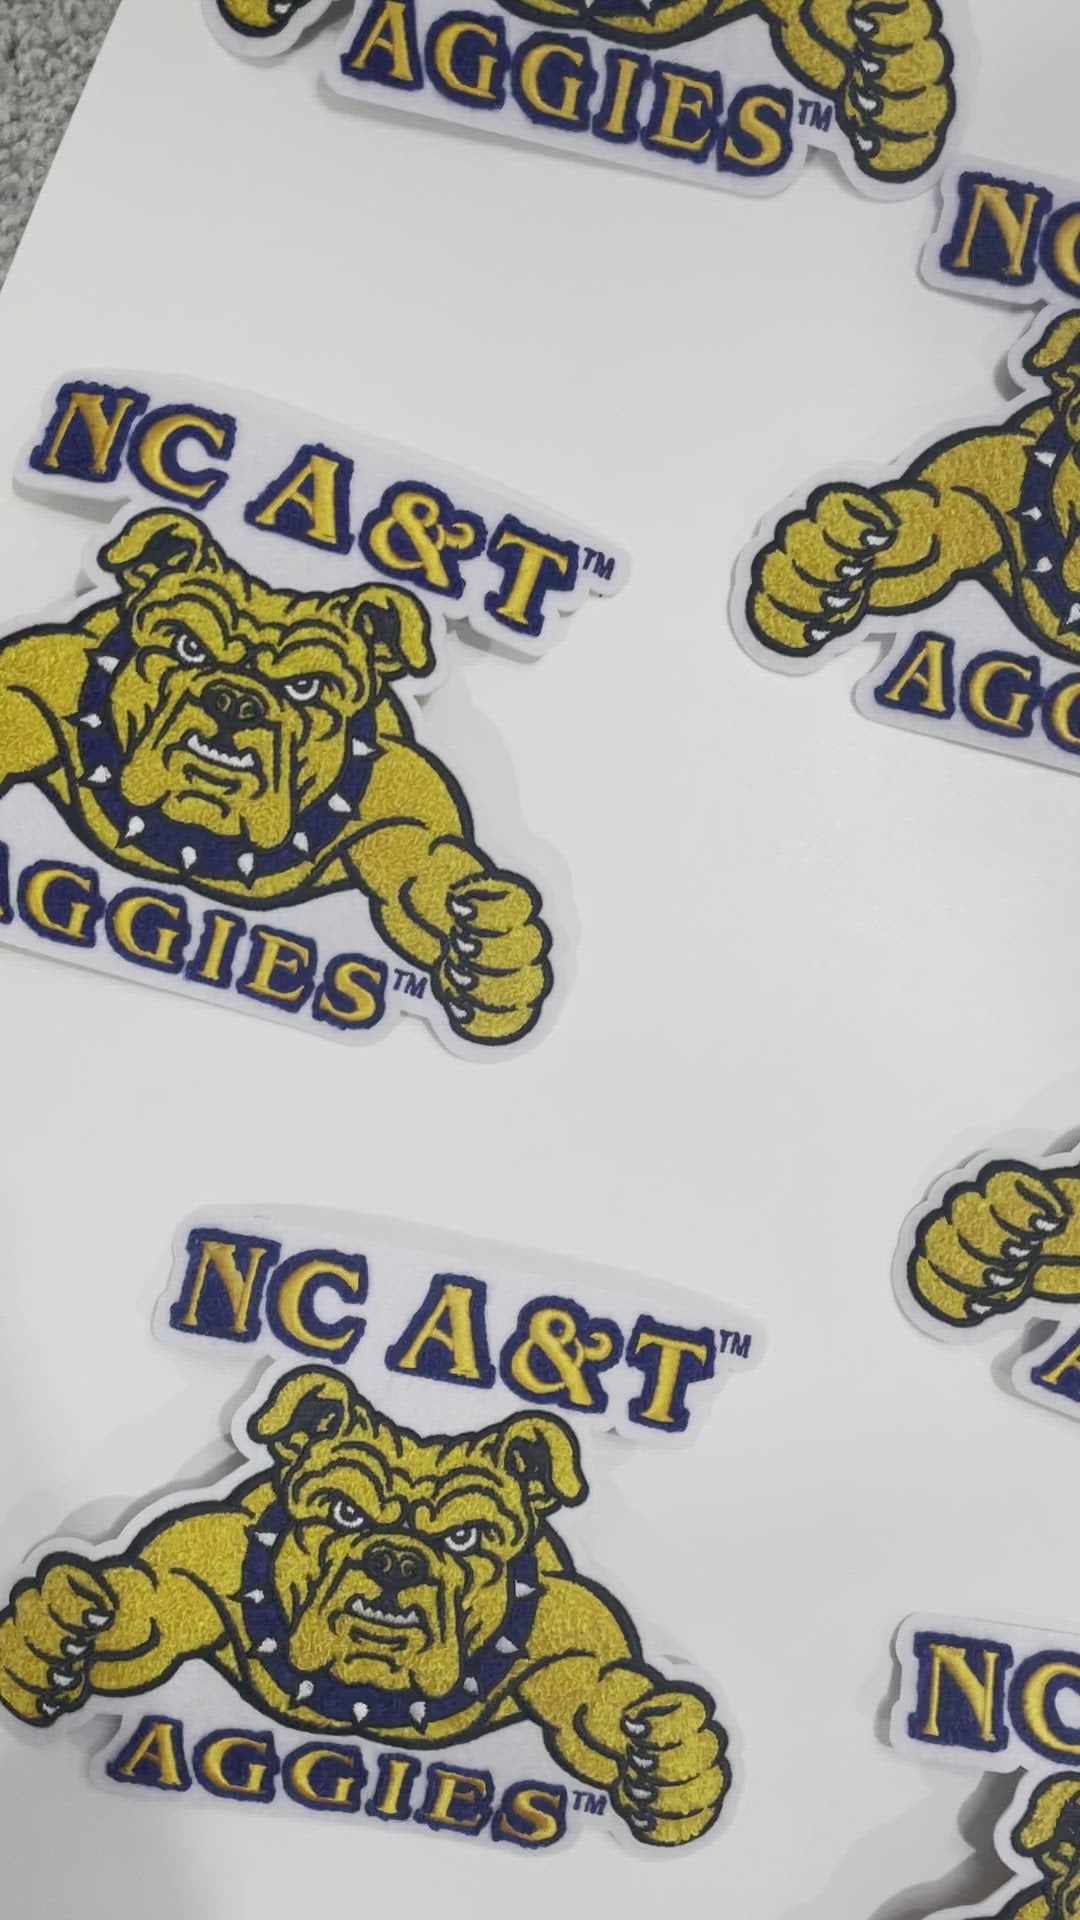 NC A&T Aggie Sew-on patches